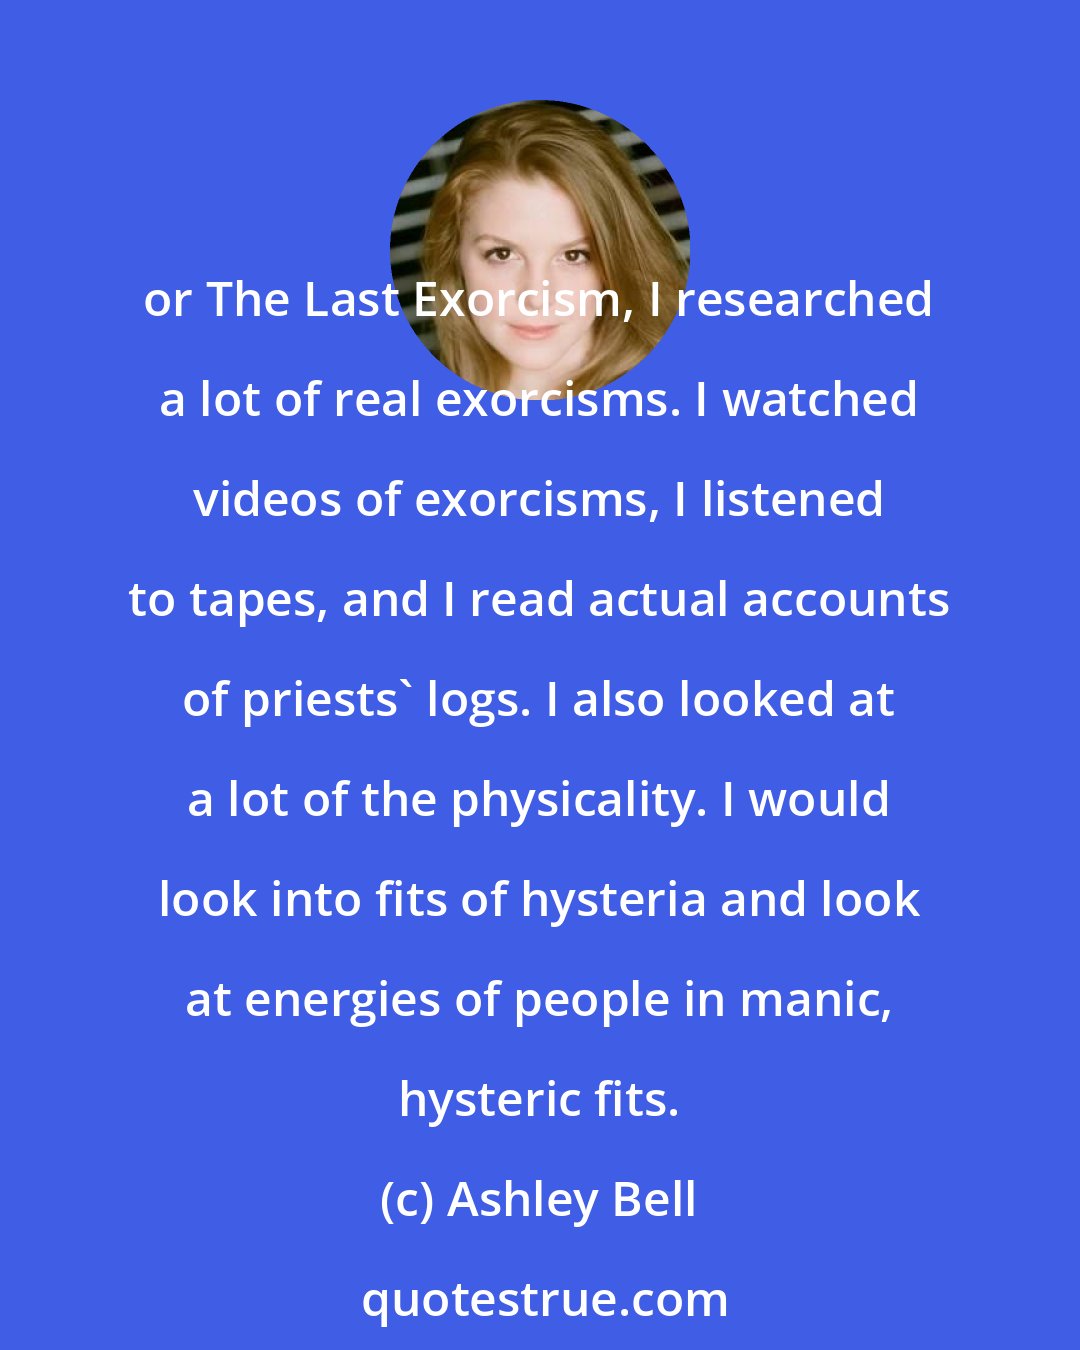 Ashley Bell: or The Last Exorcism, I researched a lot of real exorcisms. I watched videos of exorcisms, I listened to tapes, and I read actual accounts of priests' logs. I also looked at a lot of the physicality. I would look into fits of hysteria and look at energies of people in manic, hysteric fits.